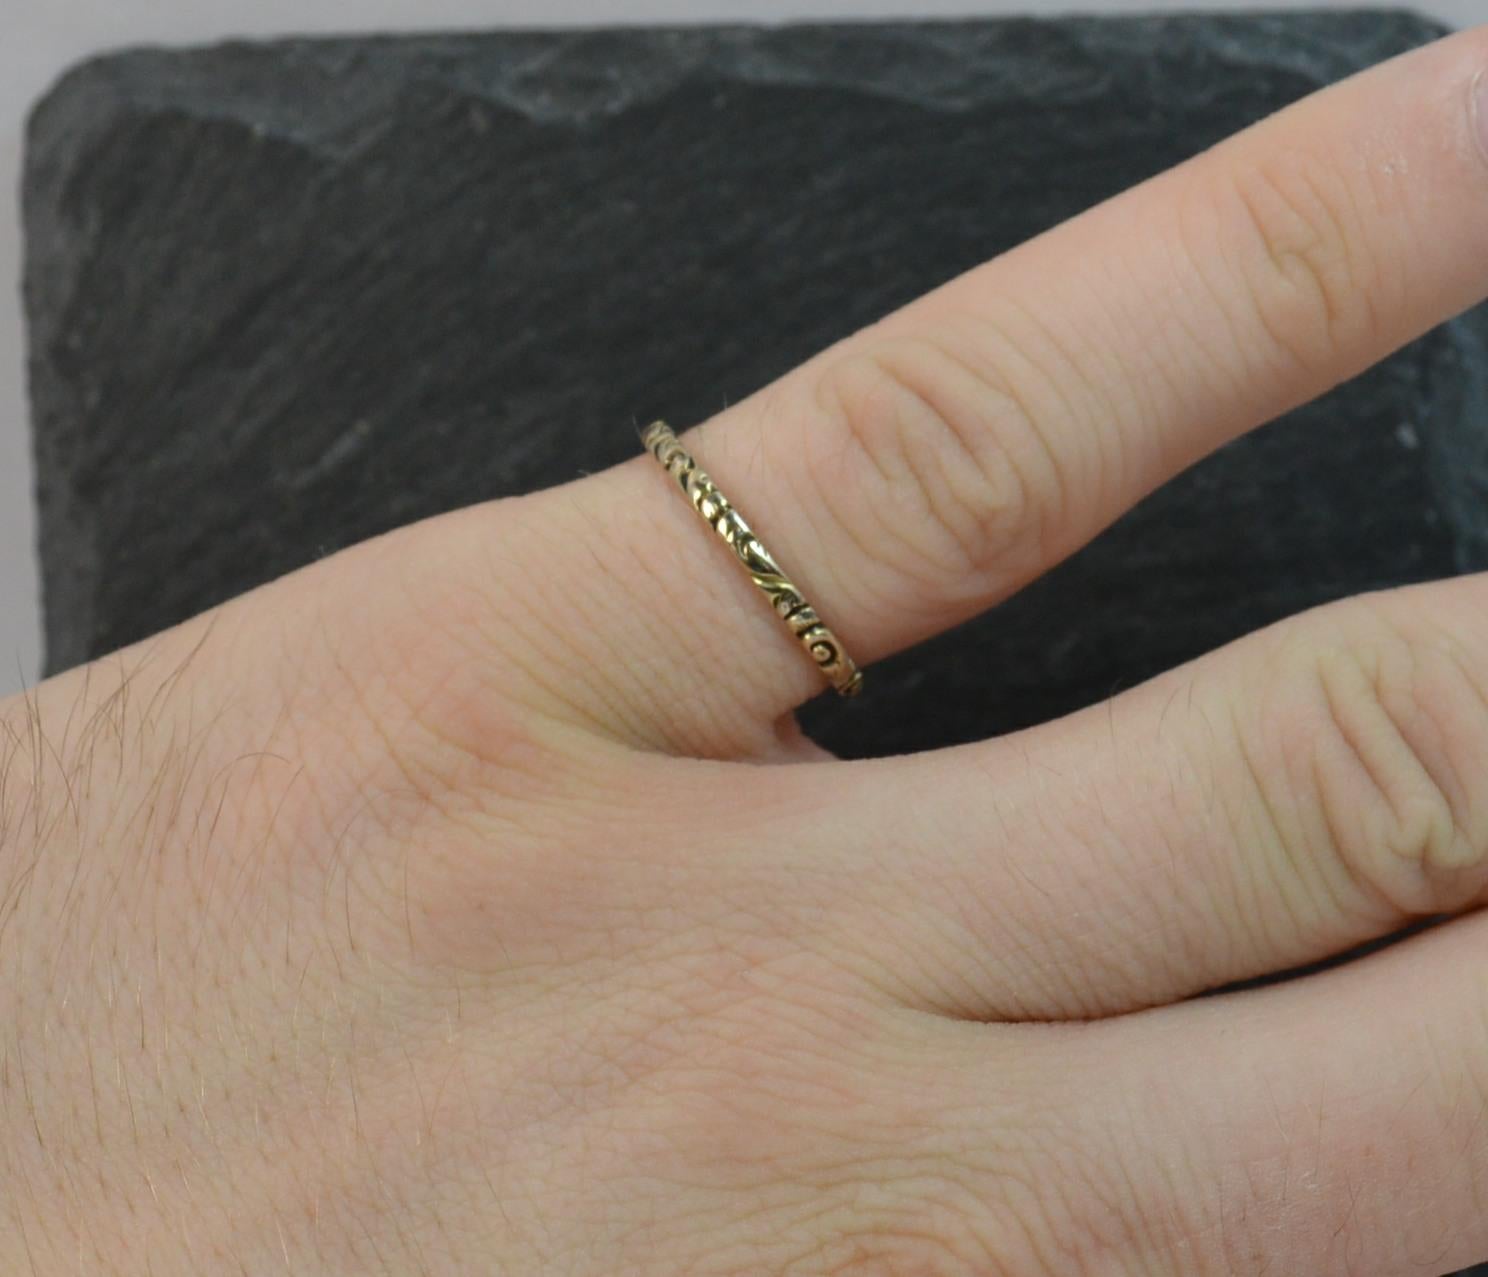 A genuine Georgian III period stack band ring. Solid gold example. Deep floral relief throughout. 1.6mm wide. c1760. SIZE ; K 1/2 UK, 5 1/2 US

CONDITION ; Good for age. Crisp pattern. Clean example. Please view photographs.
WEIGHT ; 0.7